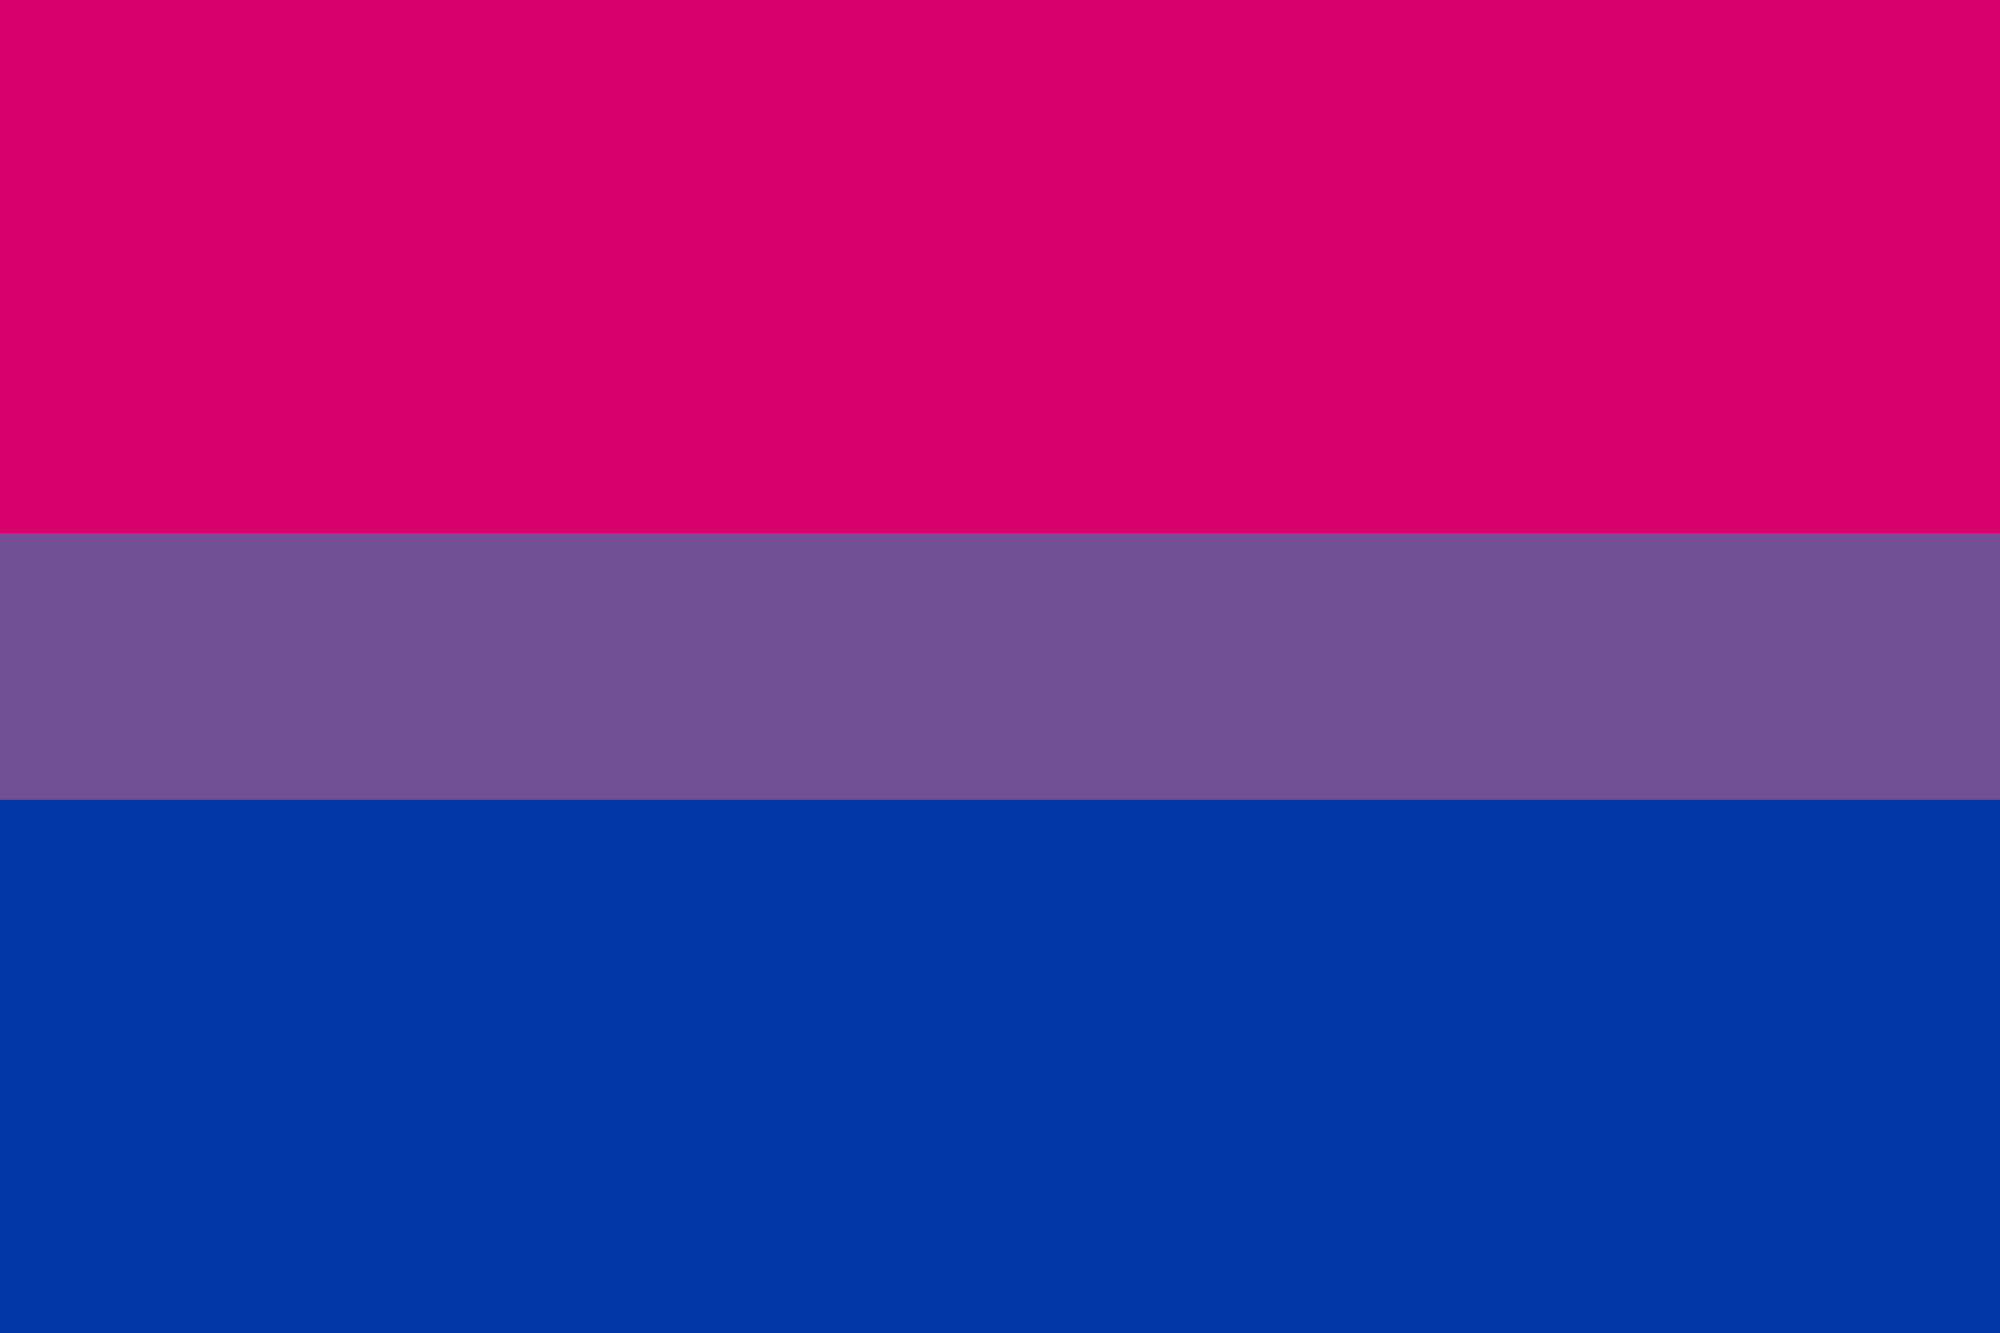 Bi Flag Full HD Wallpapers and Backgrounds